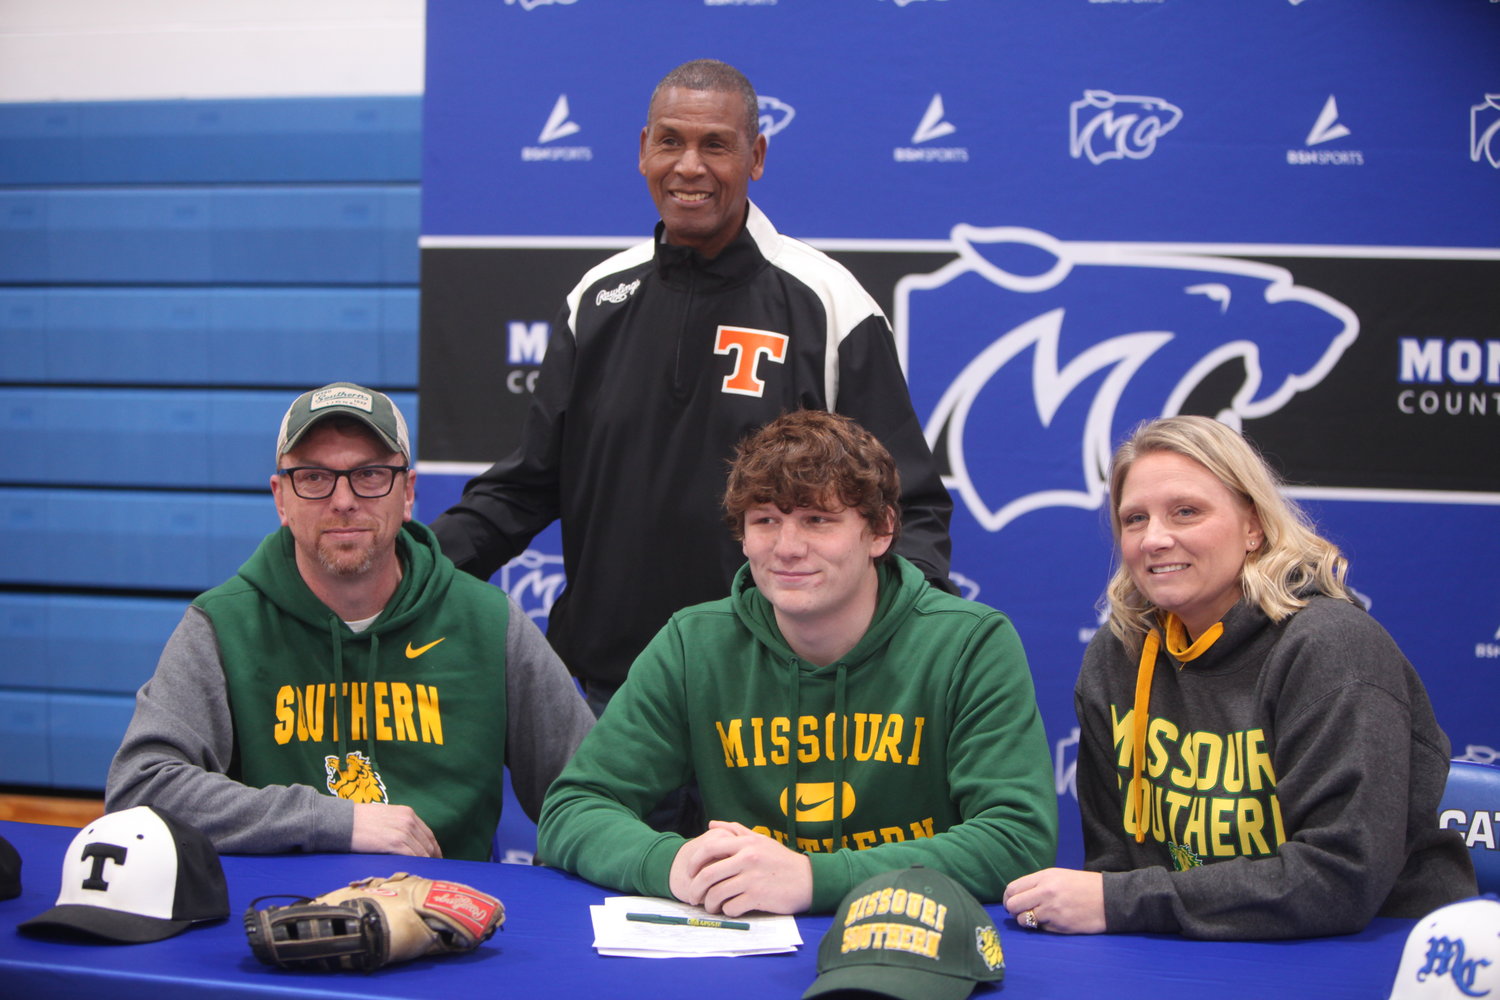 Montgomery County senior Evan Abercrombie signed a letter of intent to play baseball for Missouri Southern State University. Pictured, front row from left, are father Brad Abercrombie, Evan Abercrombie and Mandy Abercrombie. Back row is Rawlings Tigers baseball coach Grayling Tobias.